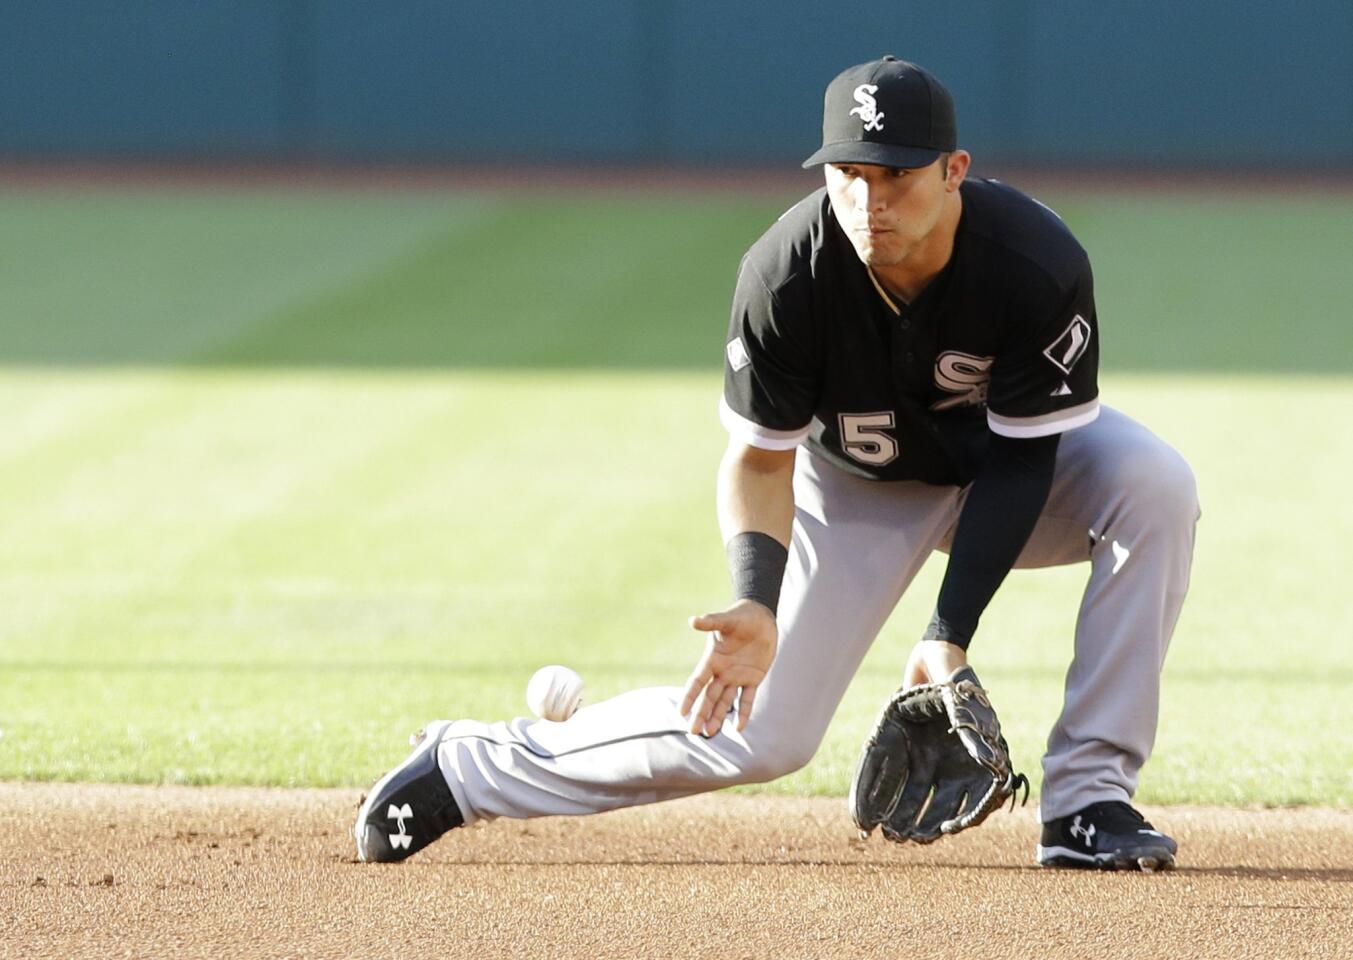 White Sox 8, Indians 1